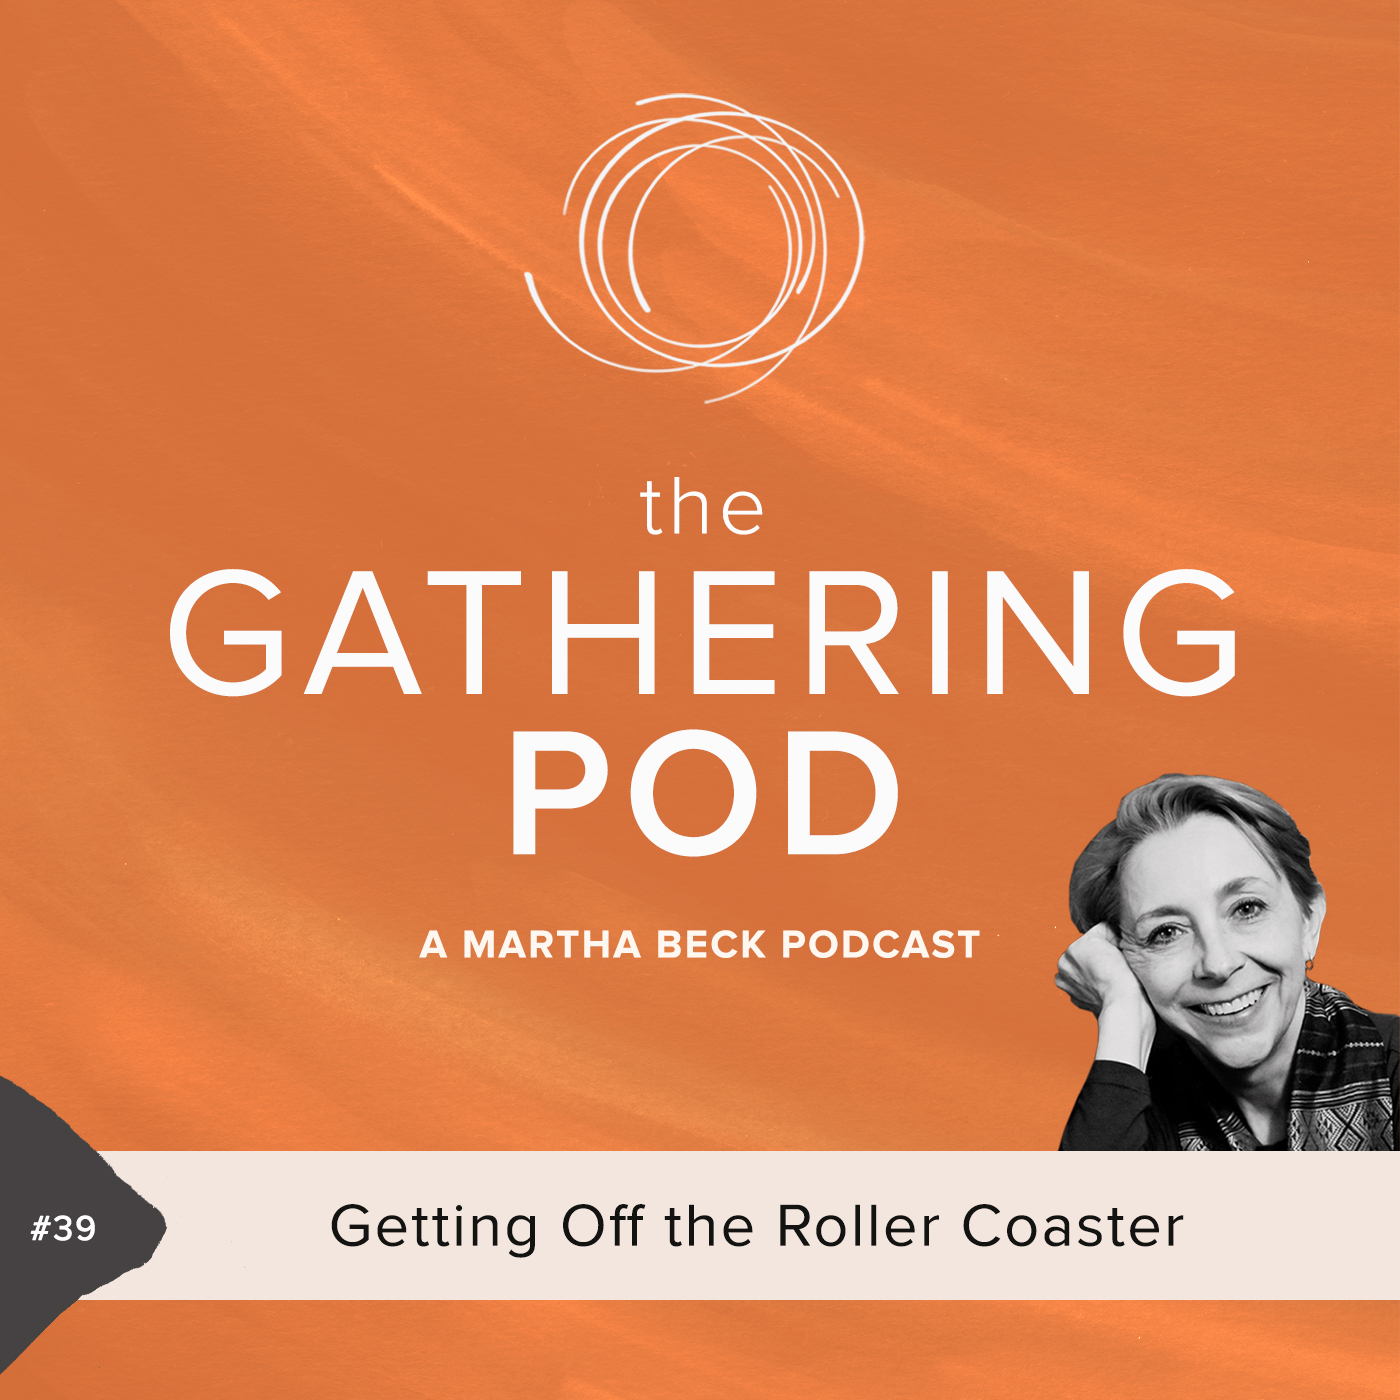 Image for The Gathering Pod A Martha Beck Podcast Episode #39 Getting Off the Roller Coaster